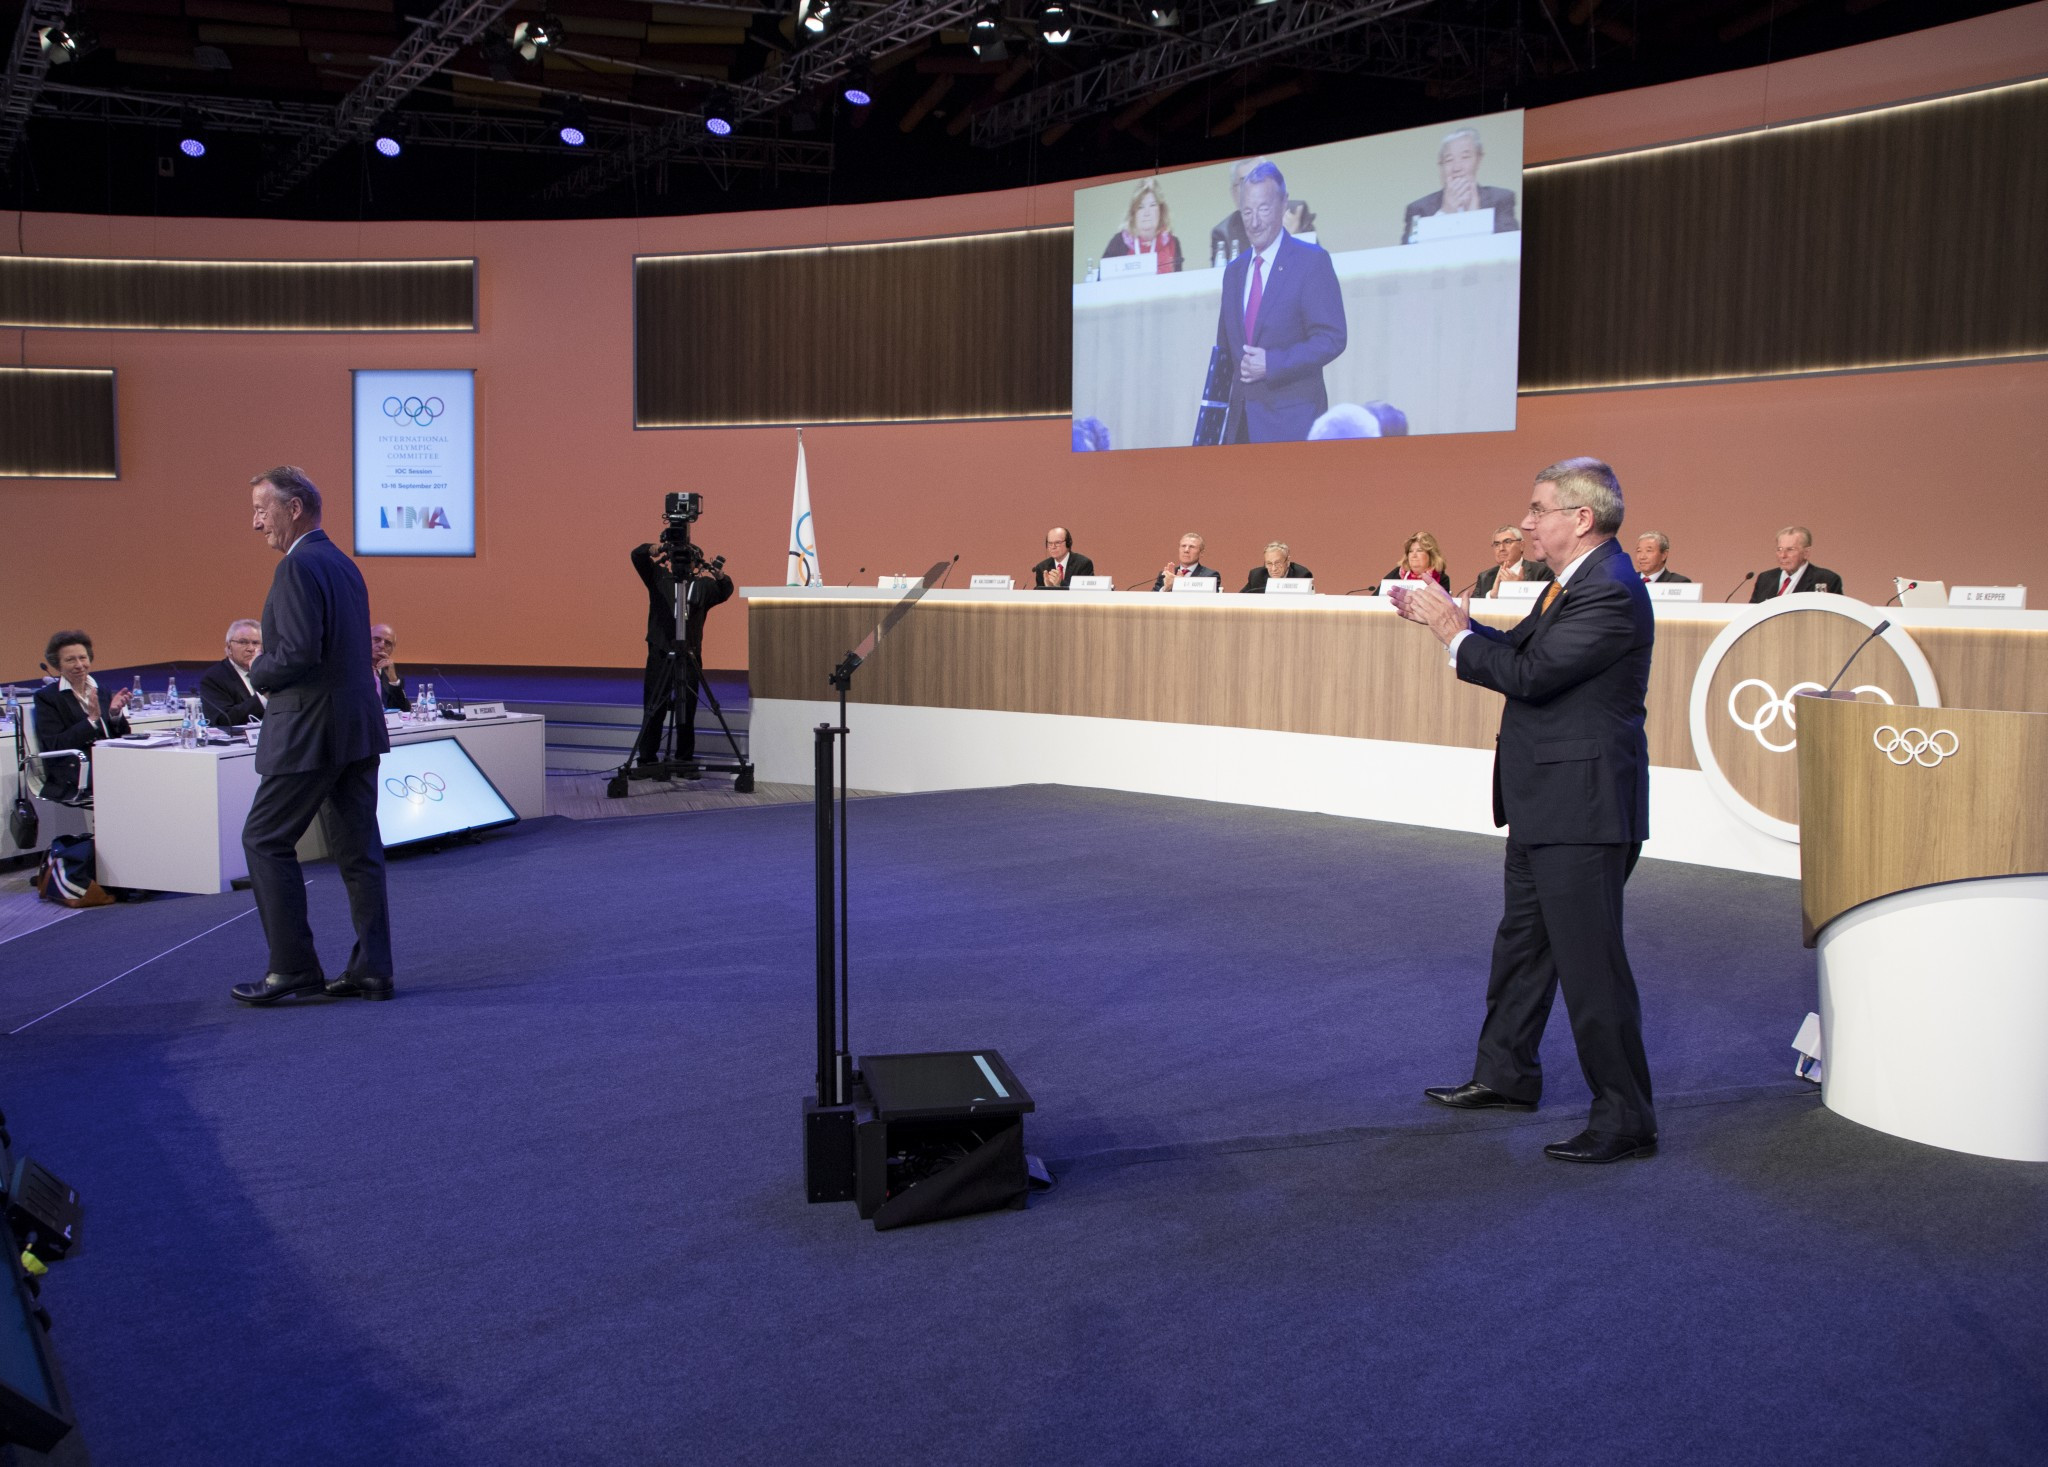 insidethegames reporting LIVE from the 131st IOC Session in Lima